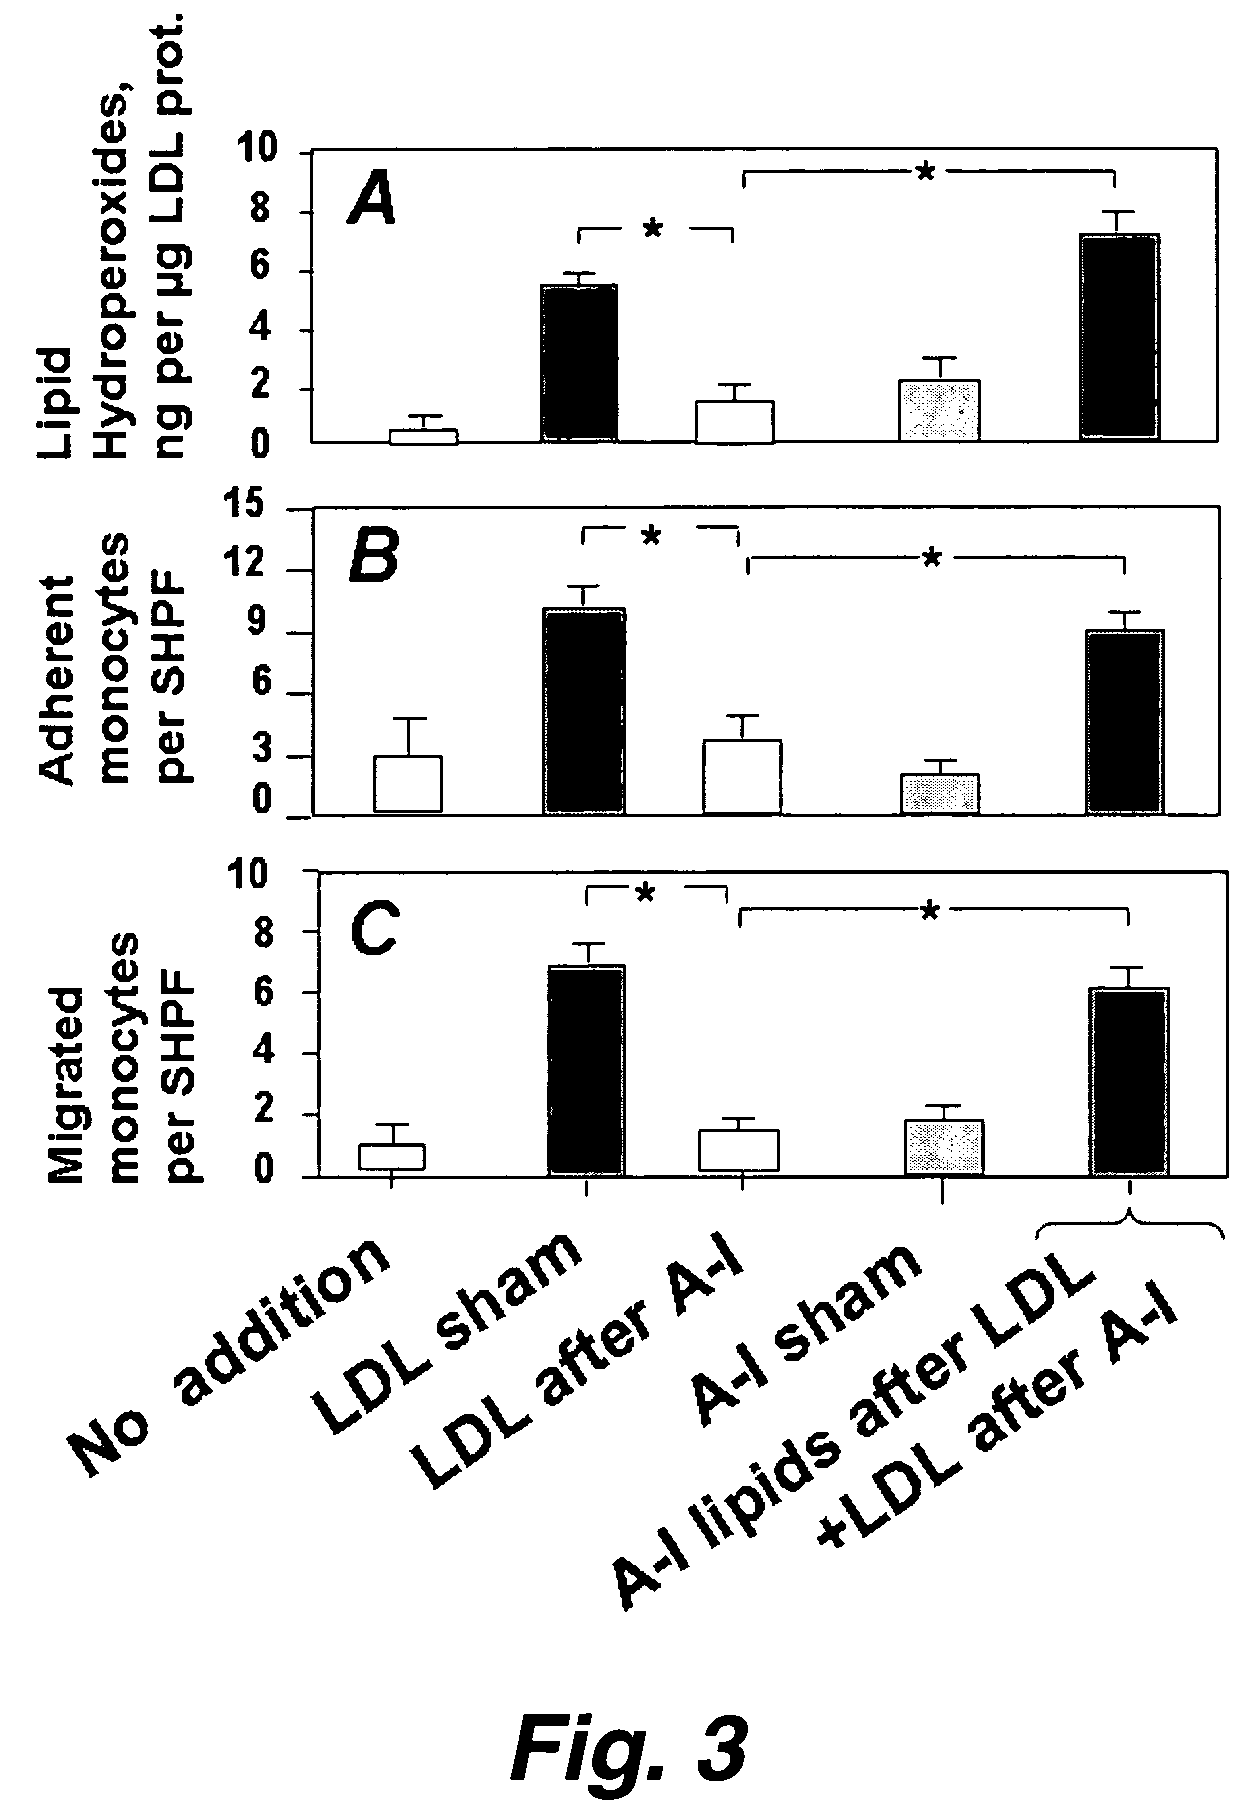 Functional assay of high-density lipoprotein